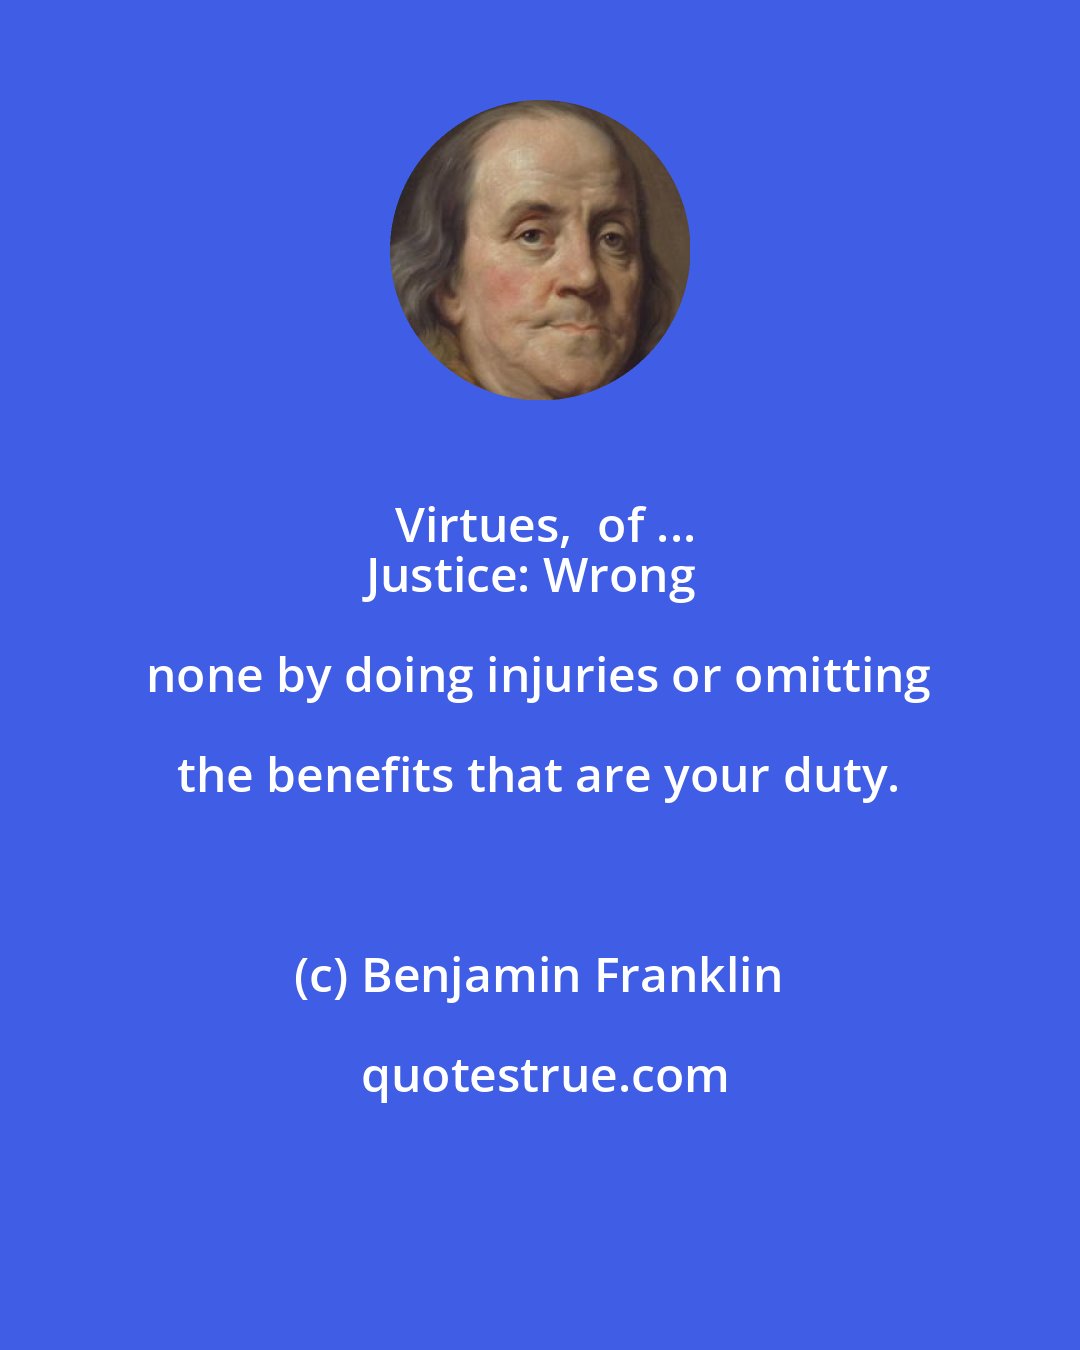 Benjamin Franklin: Virtues,  of ...
Justice: Wrong none by doing injuries or omitting the benefits that are your duty.